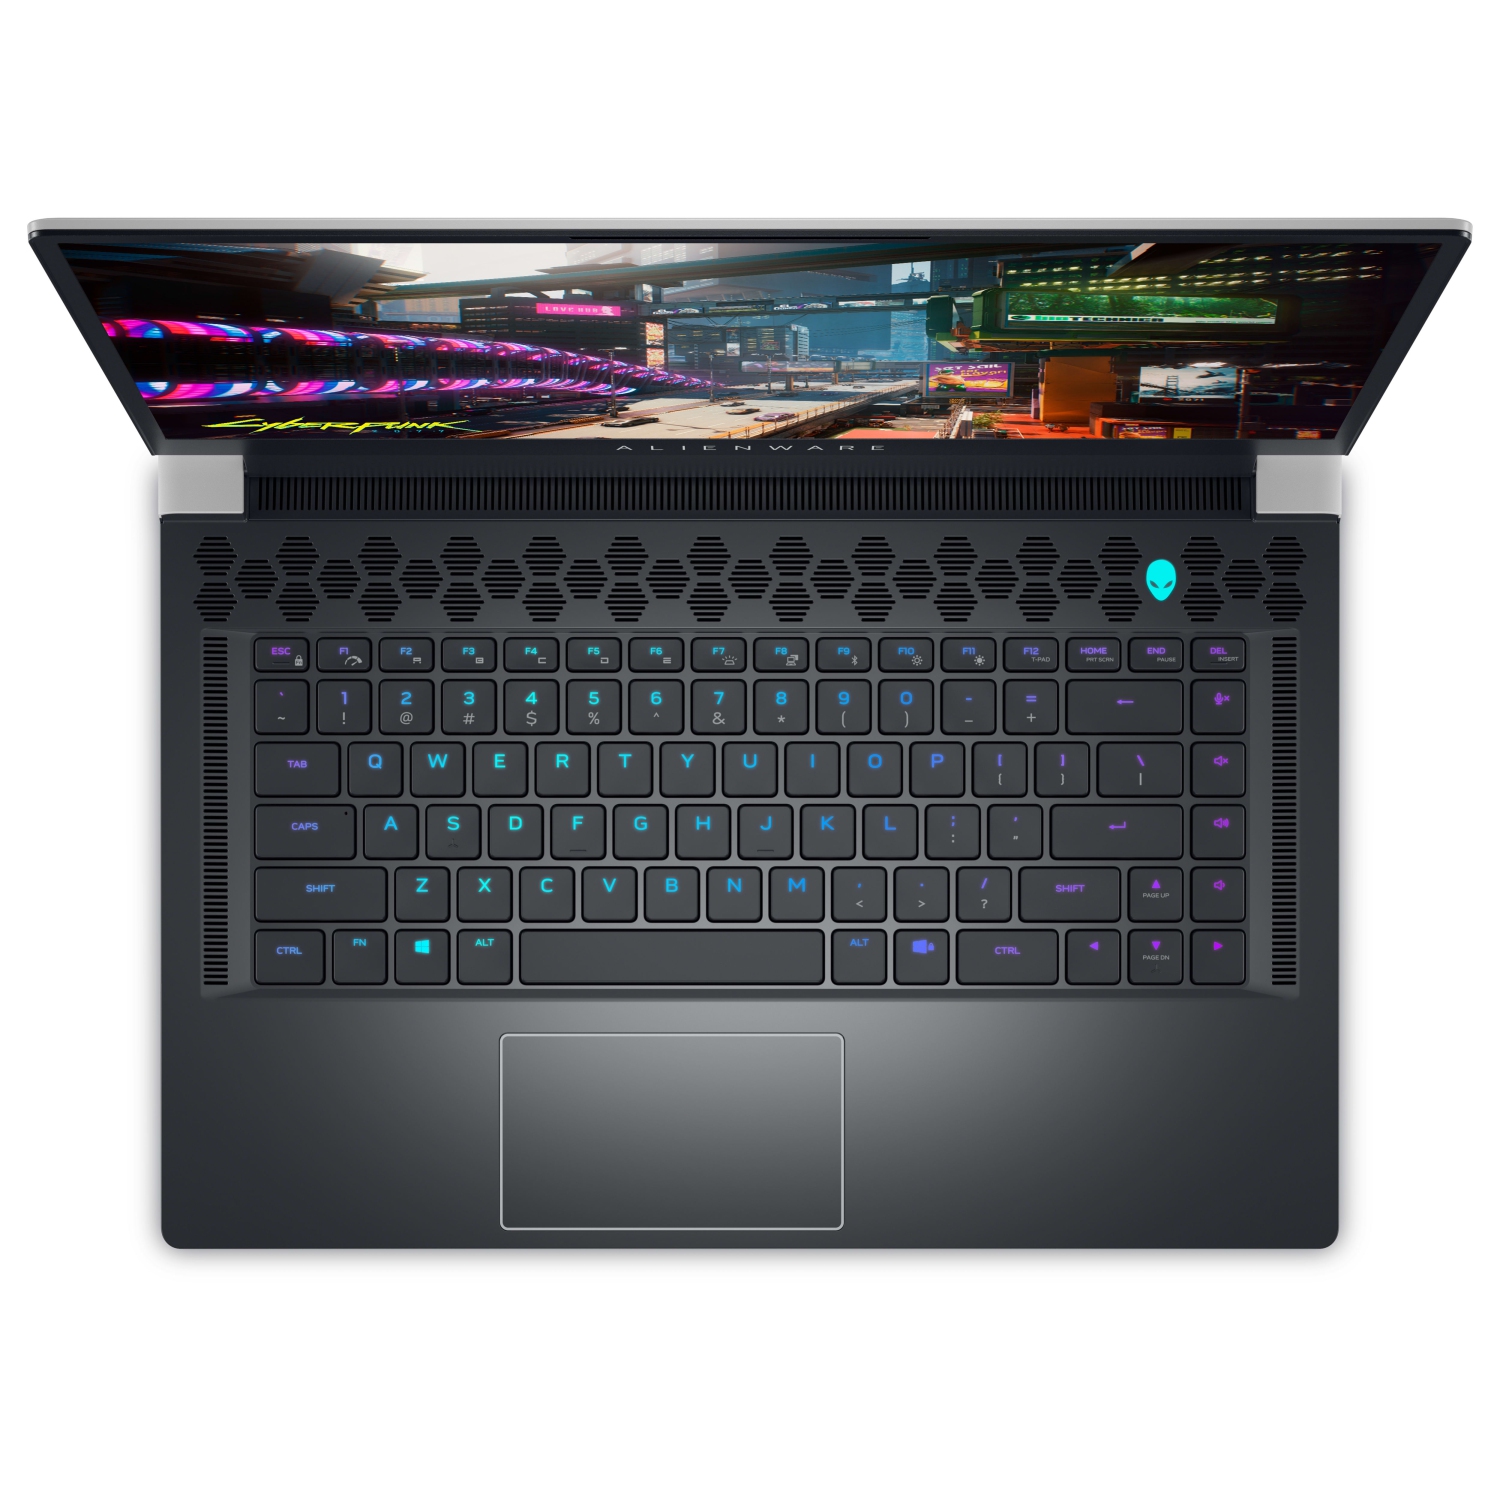 Refurbished (Excellent) – Dell Alienware X15 R2 Gaming Laptop (2022) | 15.6" QHD | Core i7 - 4TB SSD - 16GB RAM - RTX 3060 | 14 Cores @ 4.7 GHz - 12th Gen CPU - 6GB GDDR6